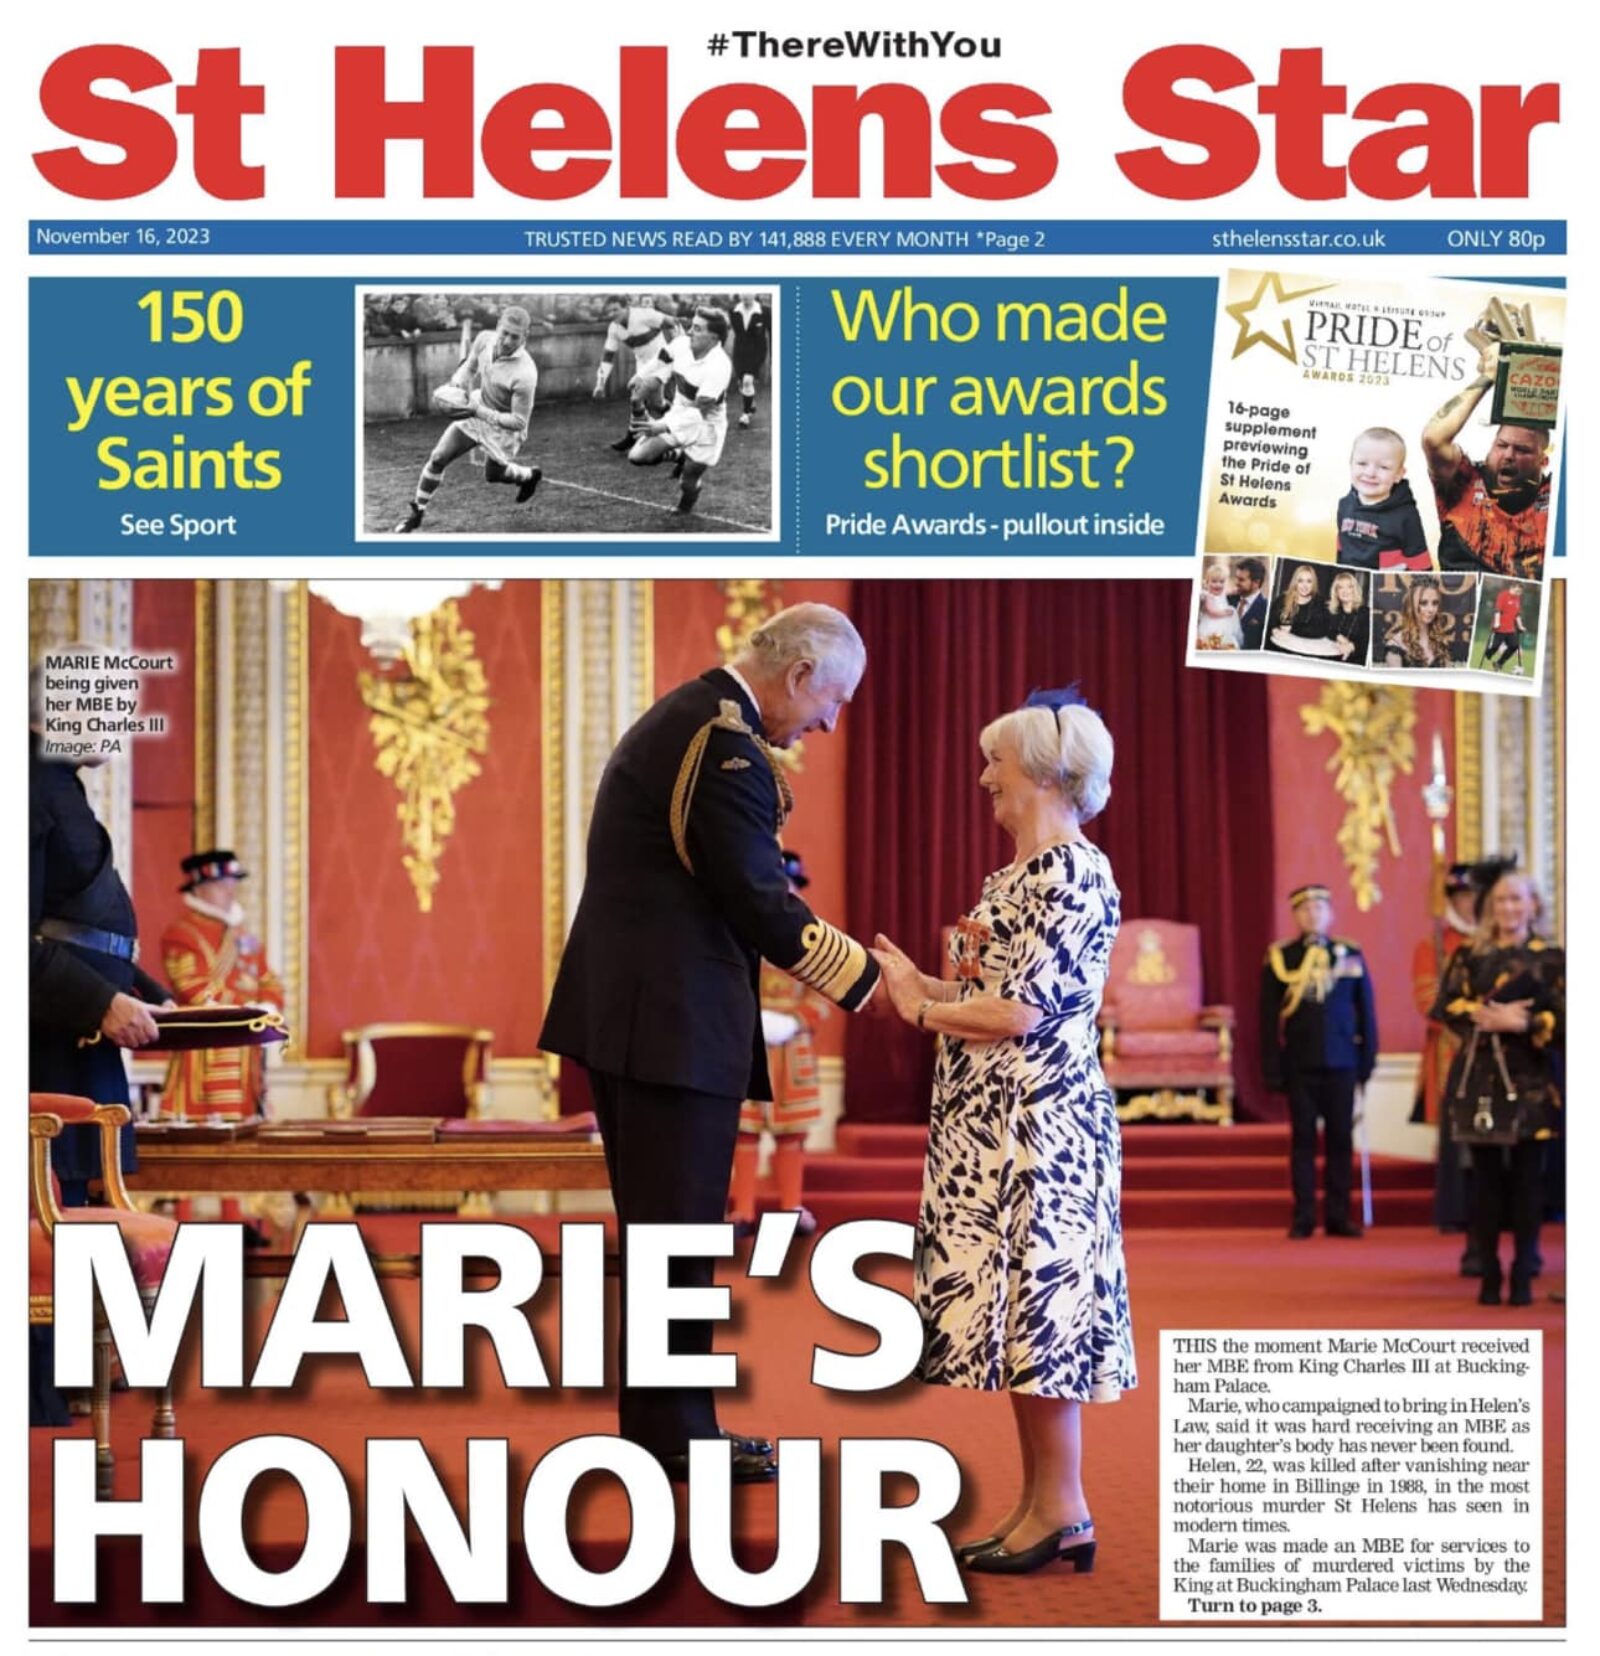 St Helens Front Page Clipping showing Marie recieving her MBE